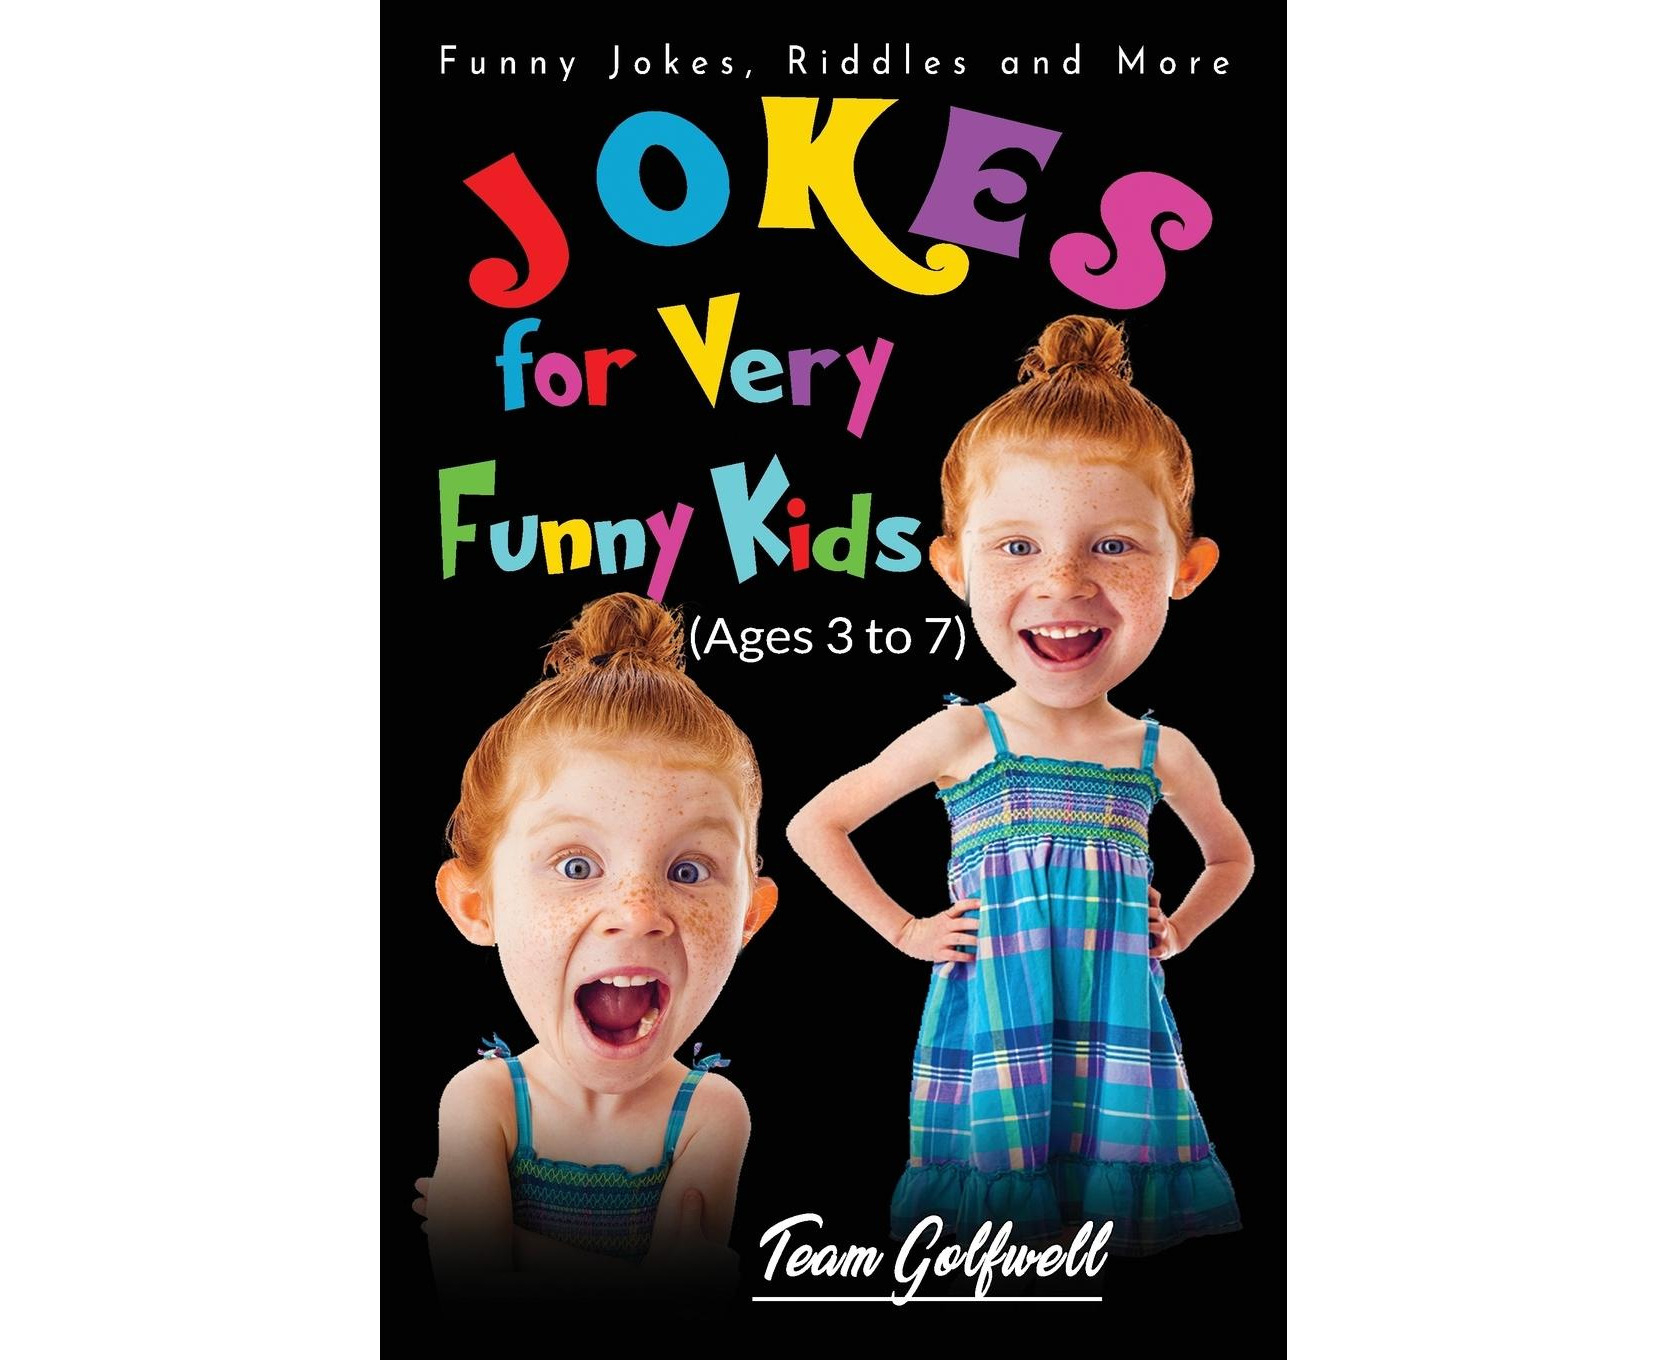 Jokes for Very Funny Kids (Ages 3 to 7): Funny Jokes, Riddles and More ( Jokes for Very Funny Kids (Ages 3 to 7)) .au